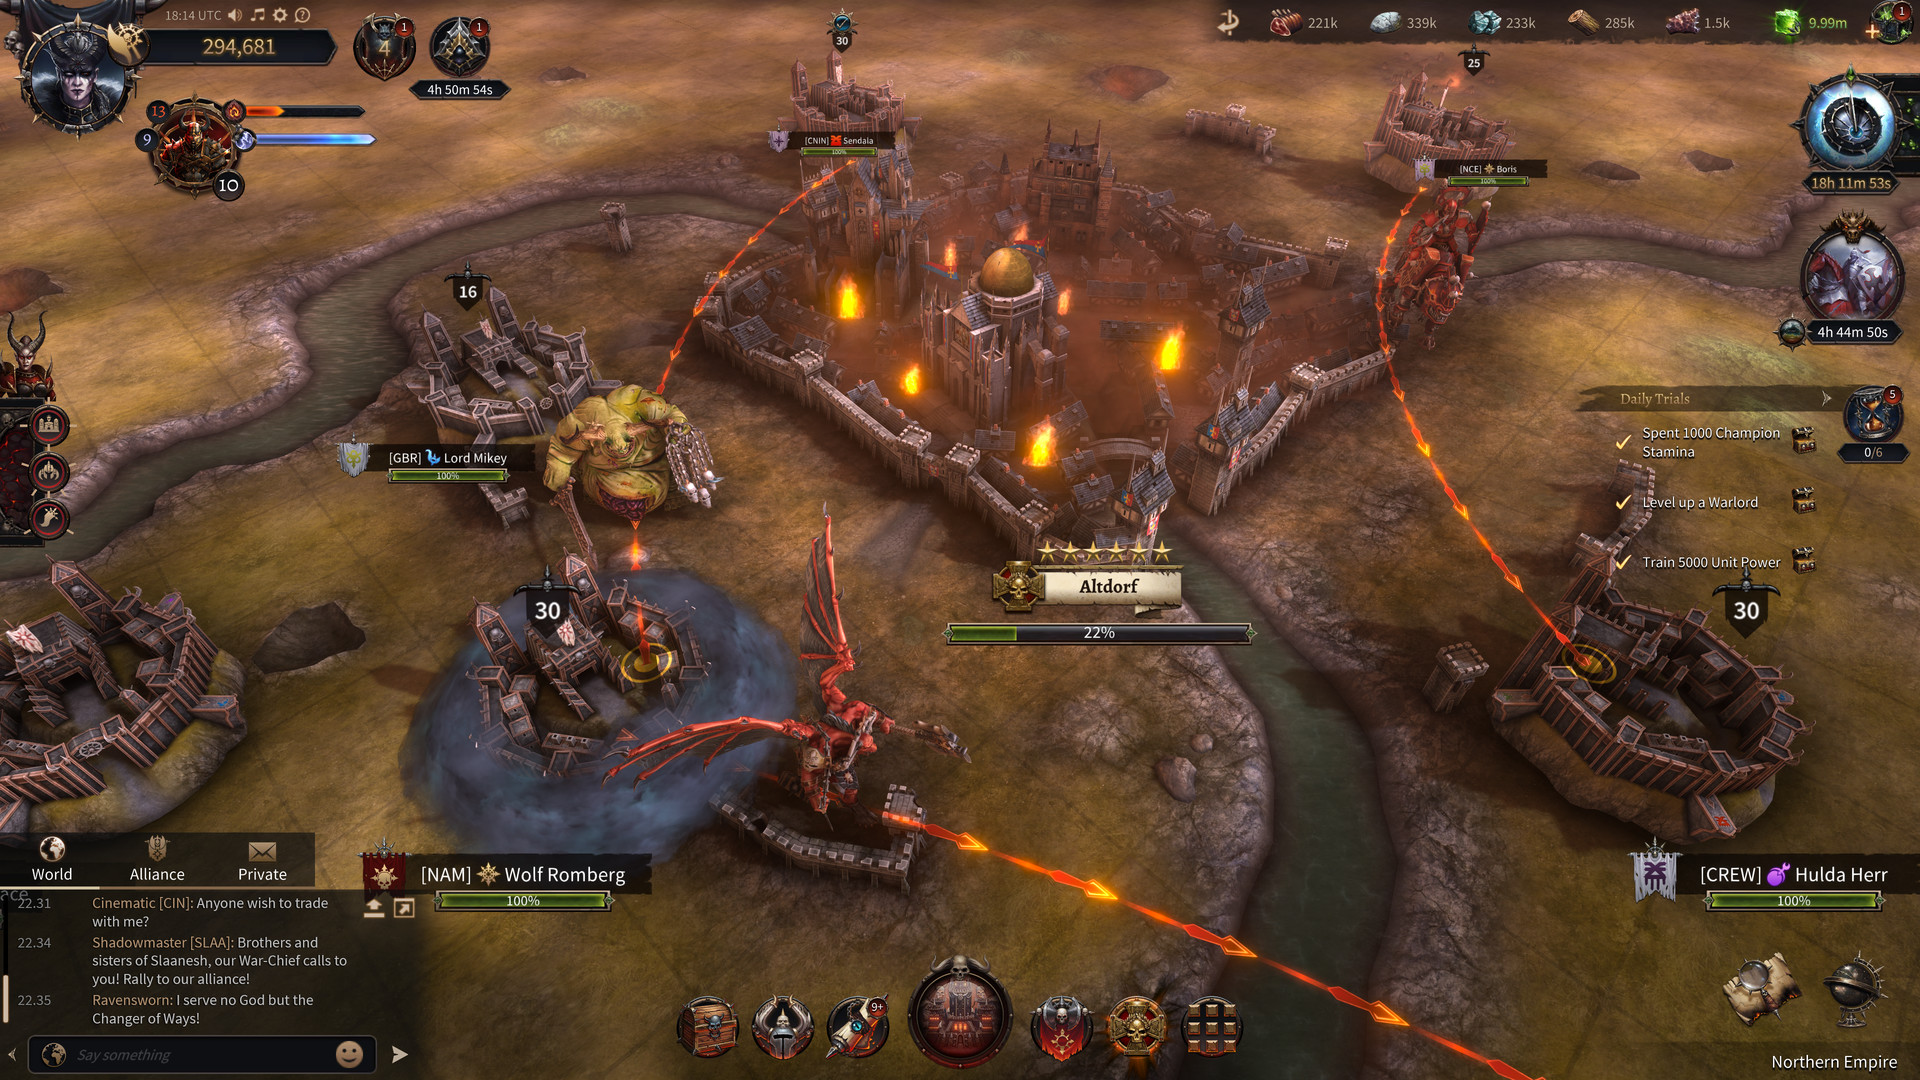 warhammer: chaos and conquest cheats